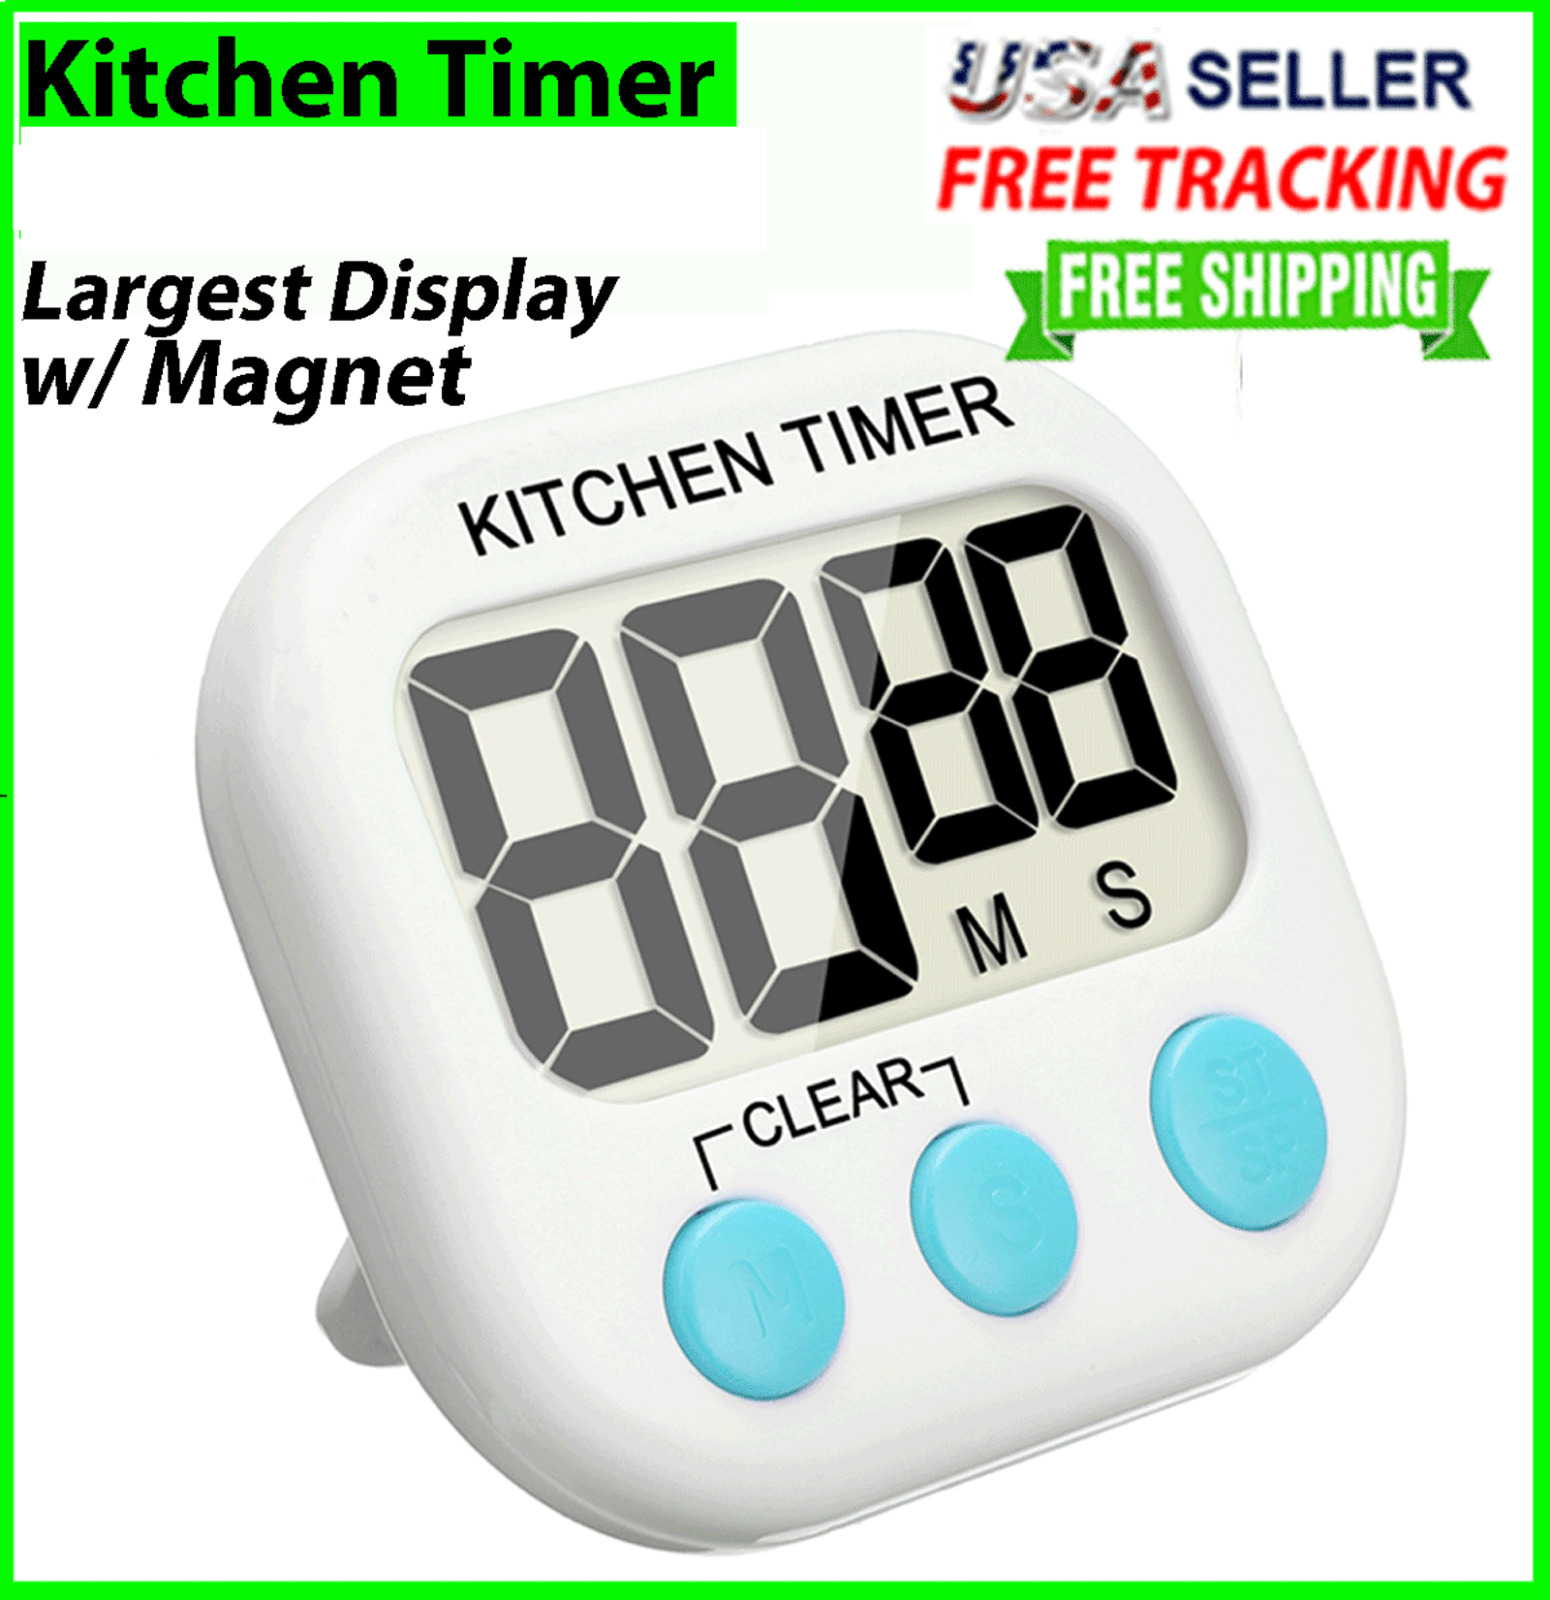 Kitchen Timer Digital Large Magnet Cooking LCD Alarm Loud Count Down Clear 99min